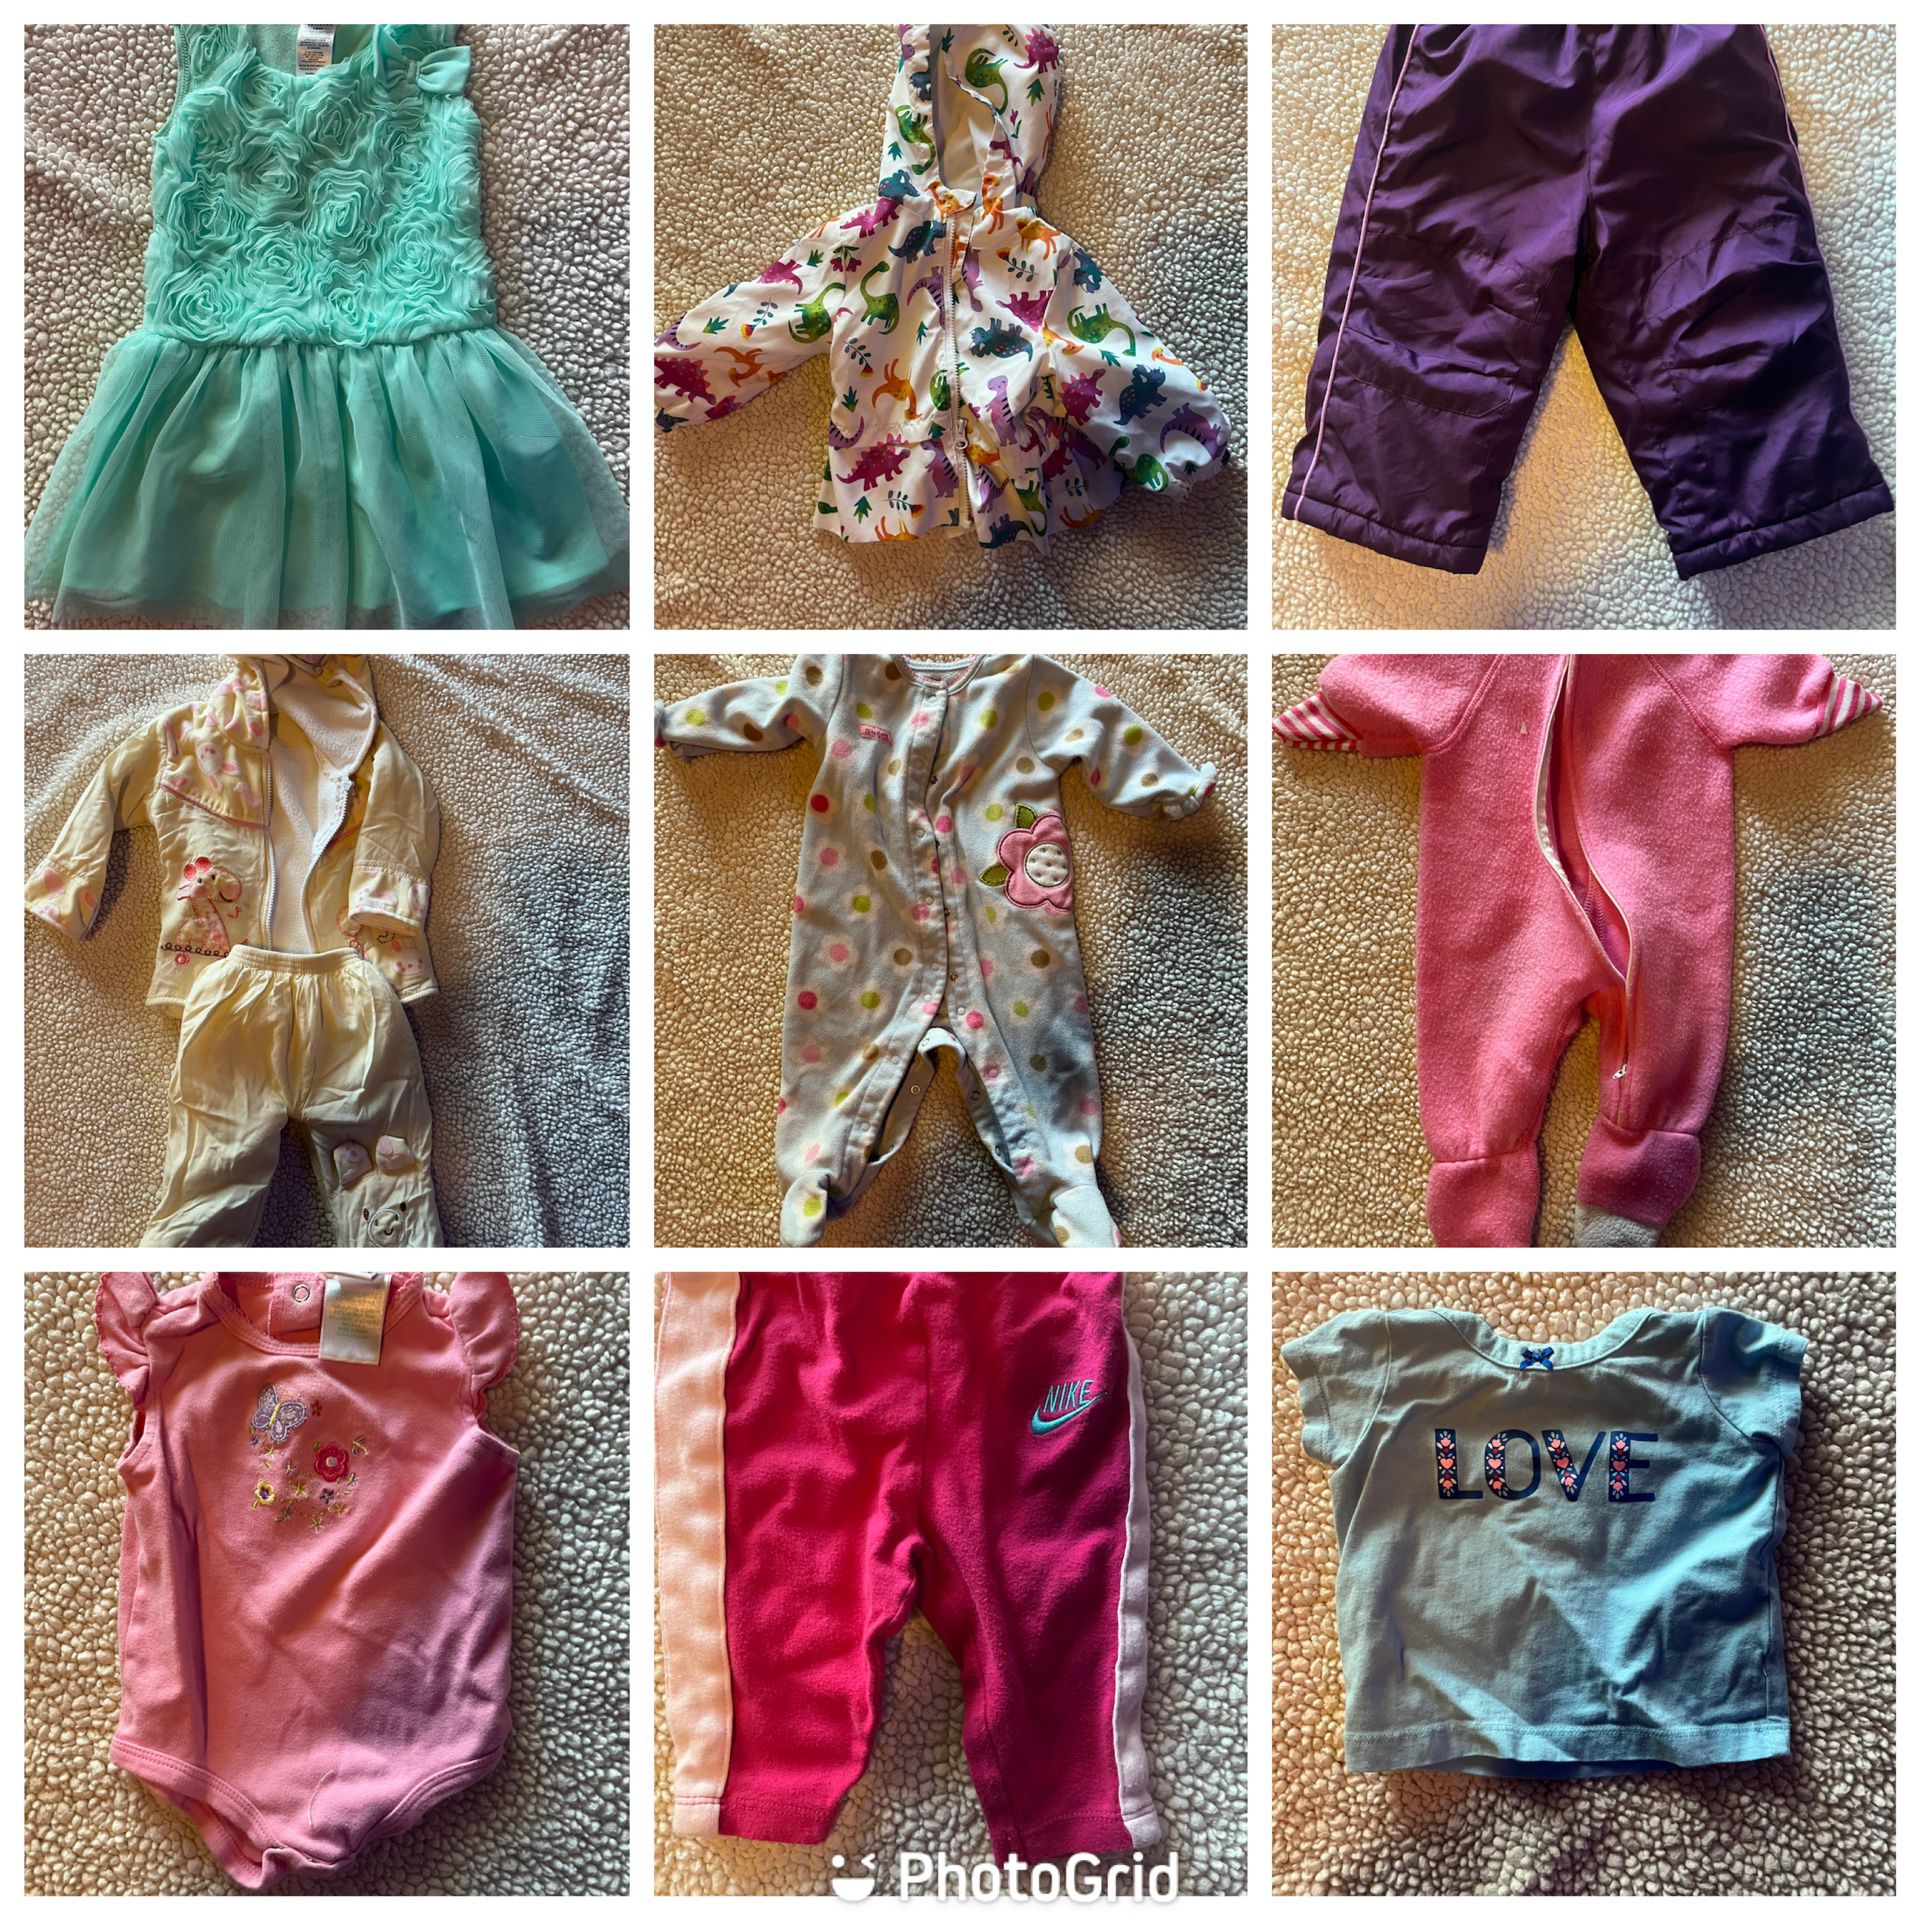 Baby Girls Clothes Bundle - 11 Items